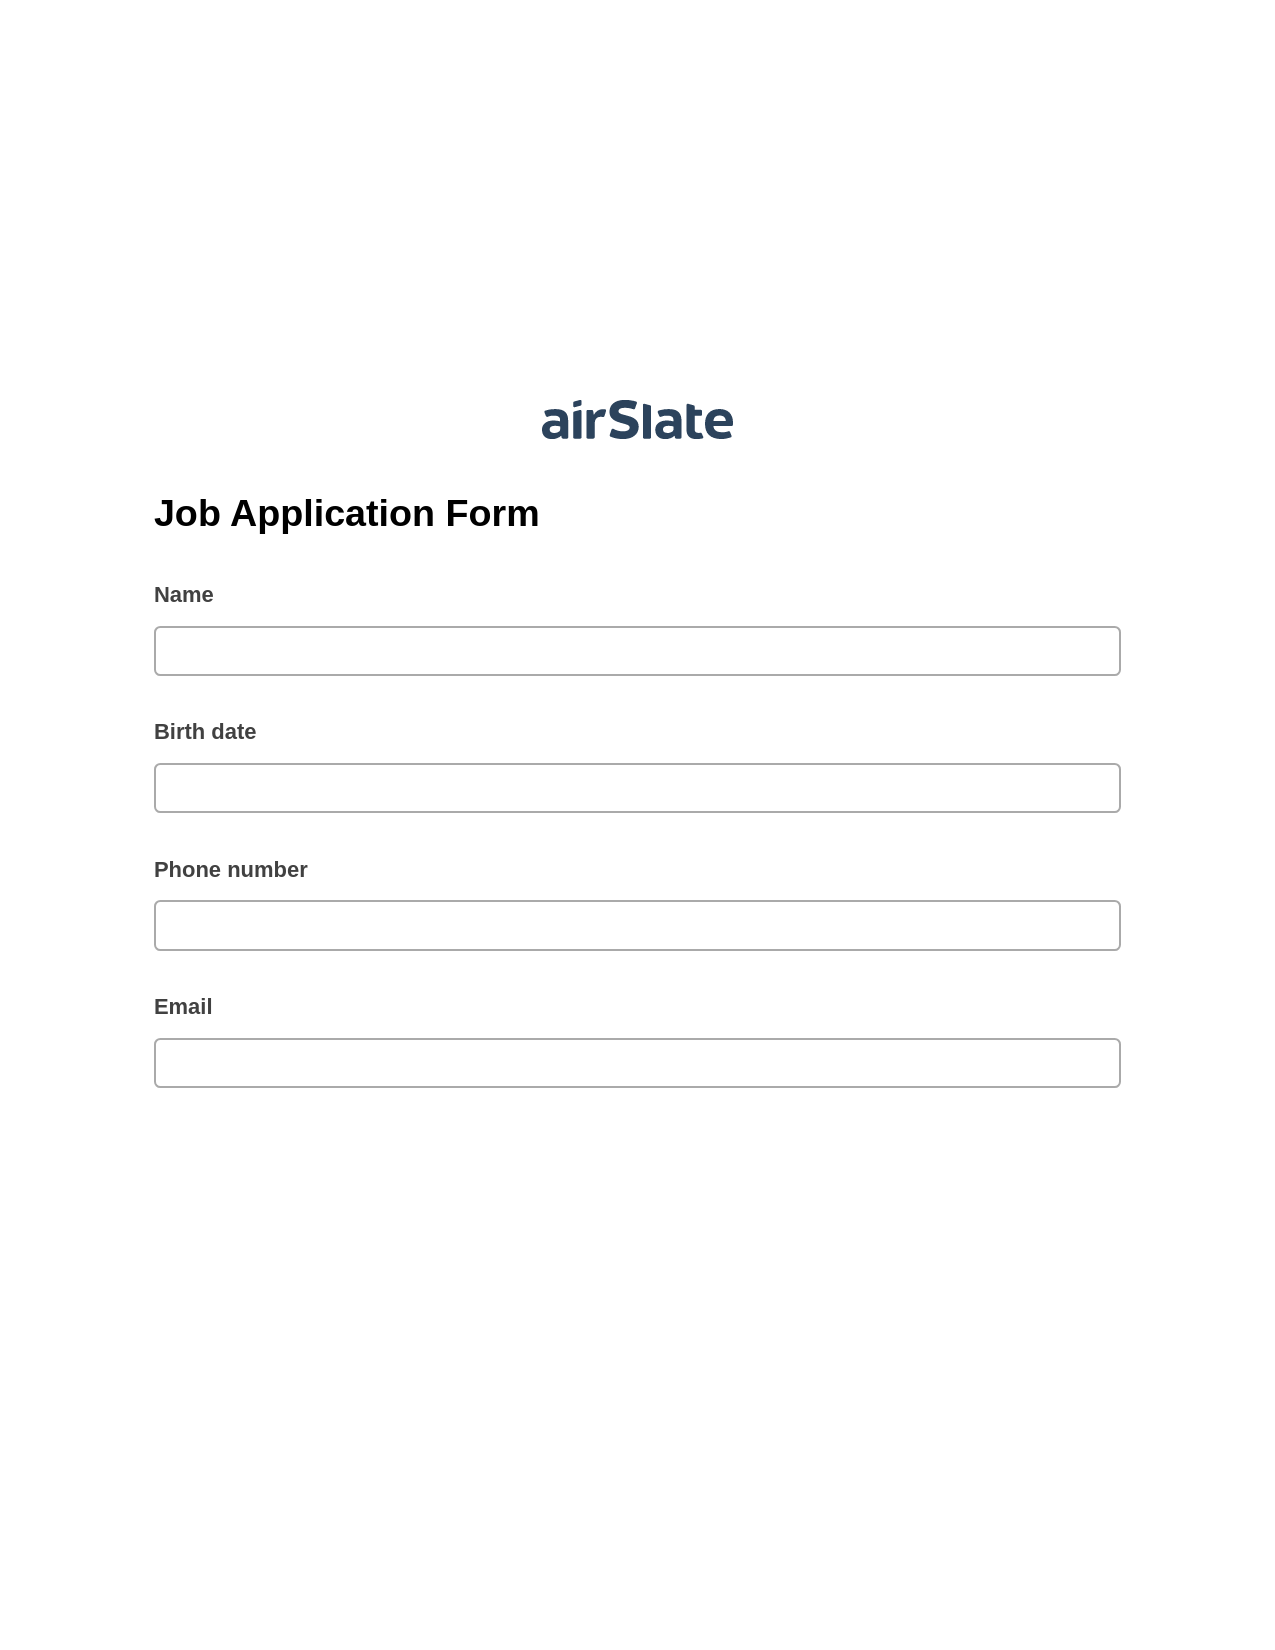 Job Application Form Pre-fill from Google Sheet Dropdown Options Bot, Create NetSuite Records Bot, Export to Formstack Documents Bot